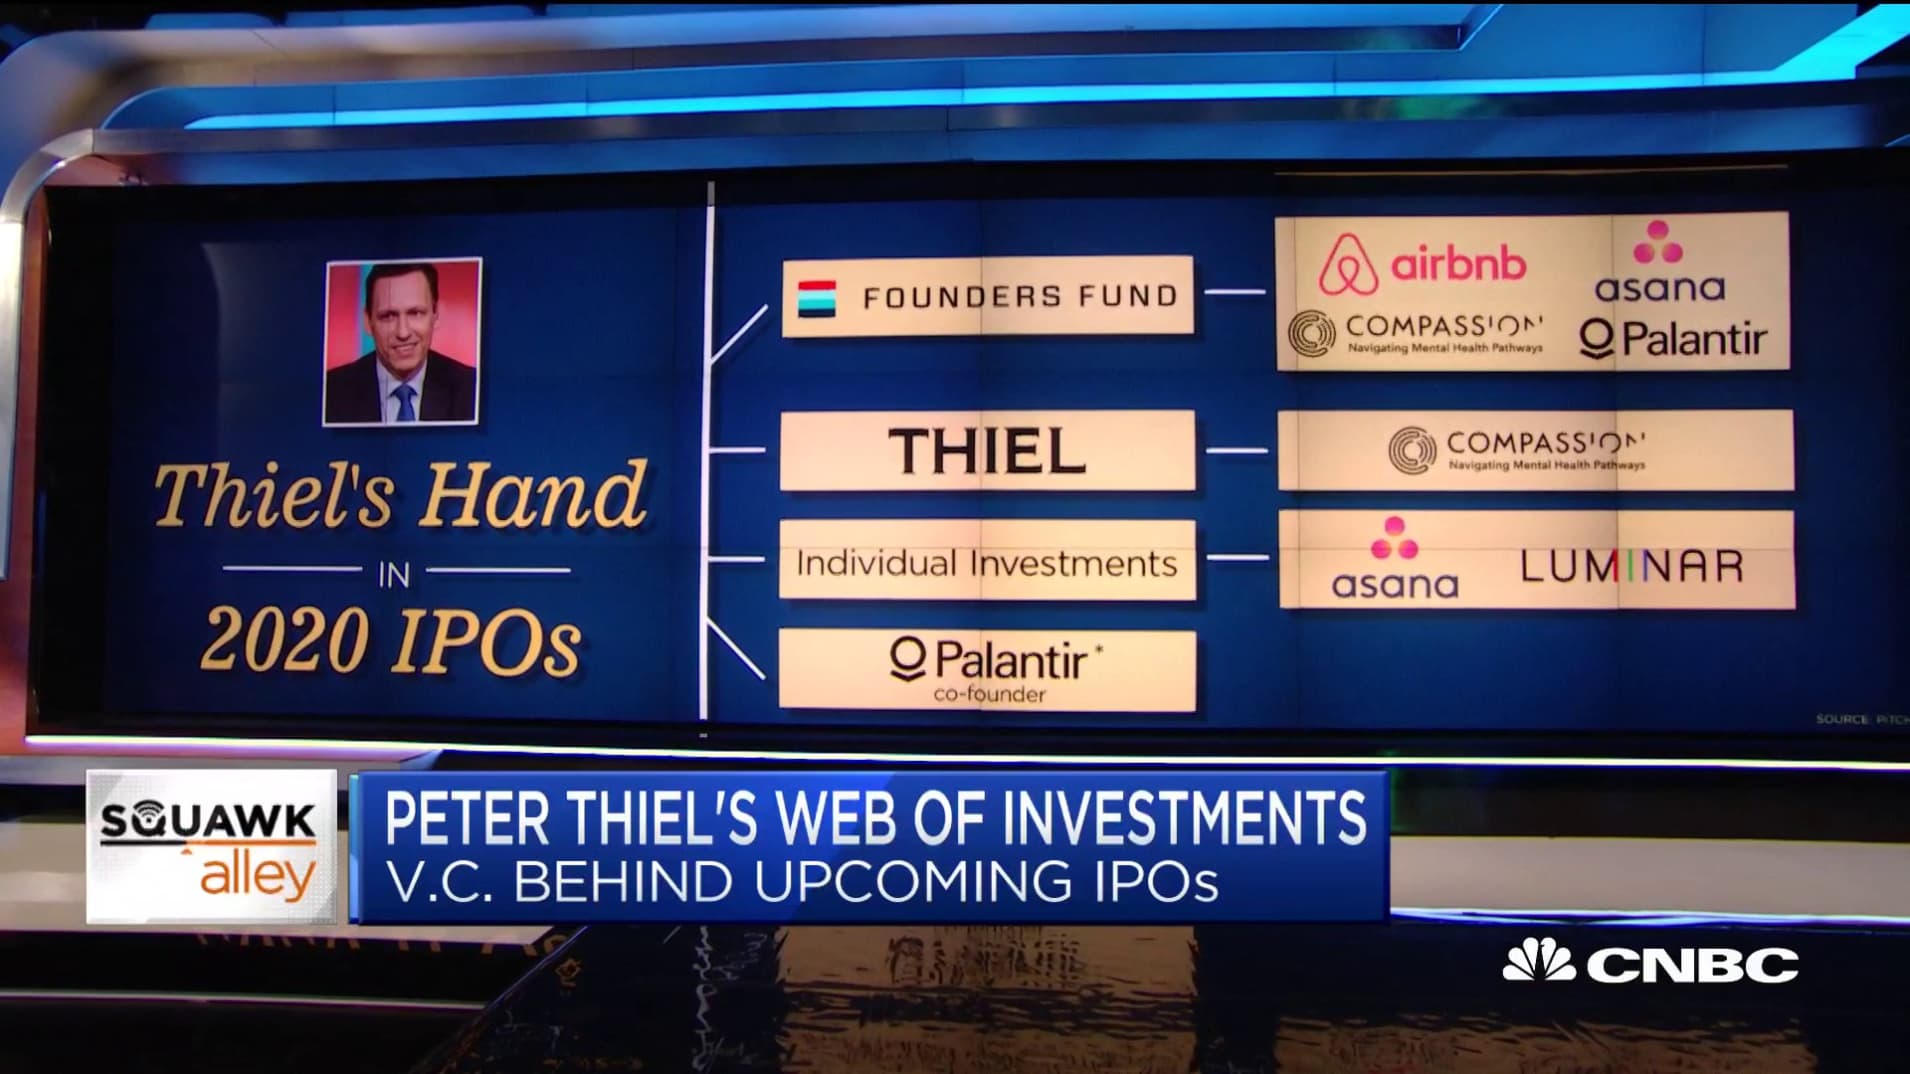 Peter Thiel has kept up his startup investments in Europe | Sifted